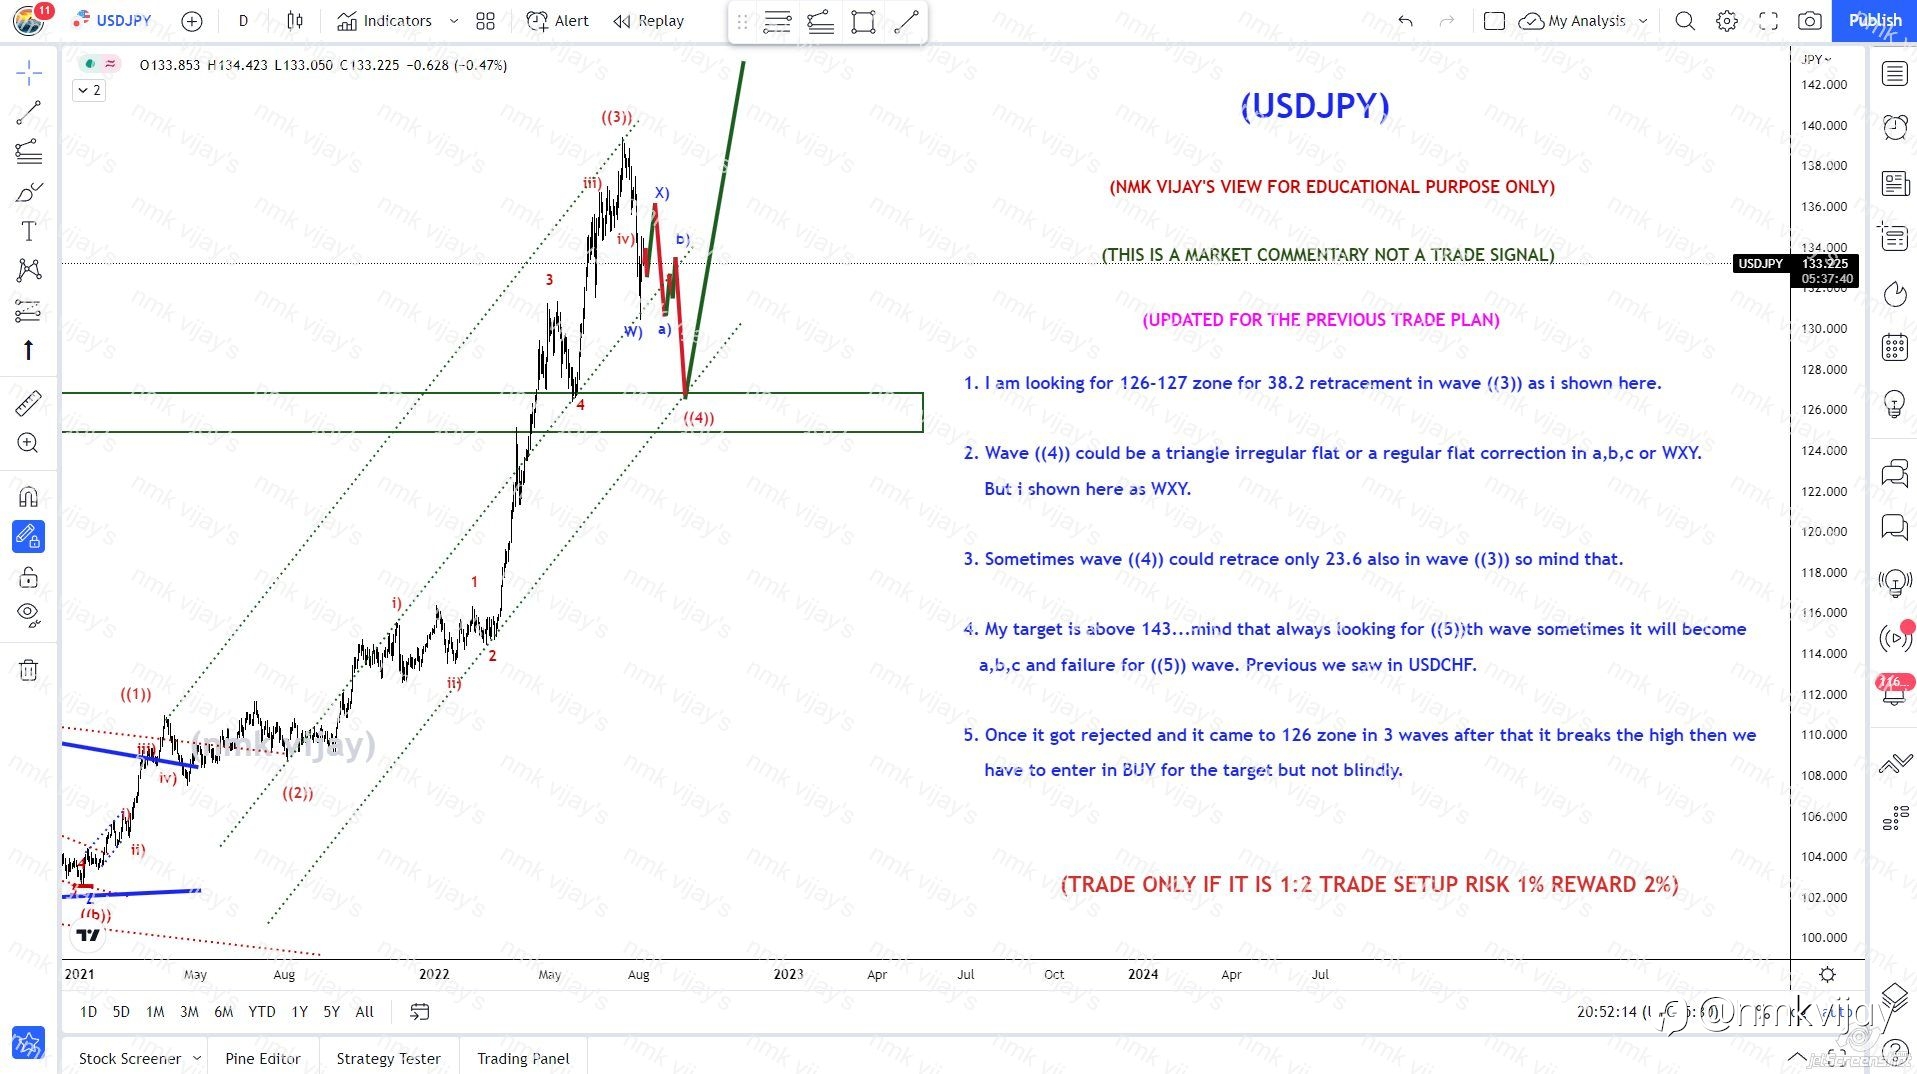 USDJPY-Looking for WXY for wave ((4)) to complete @ 127 approx